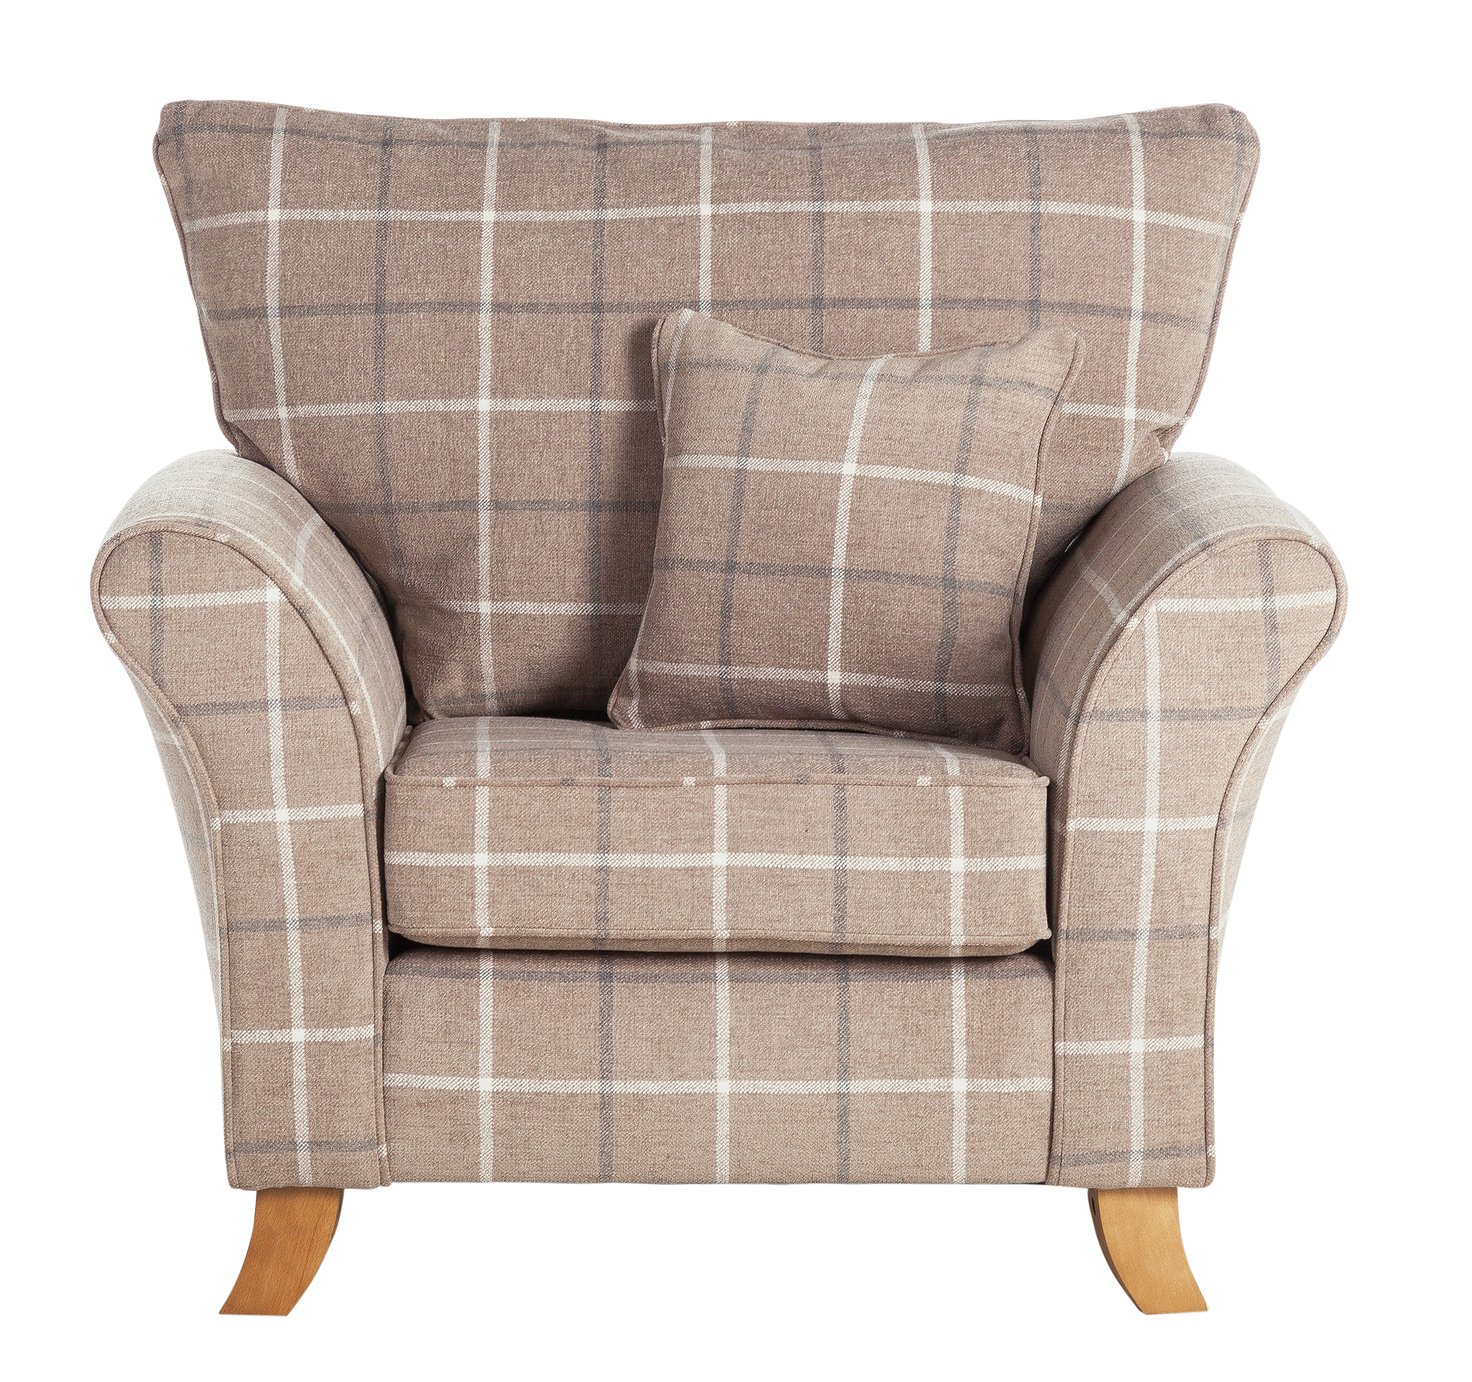 Buy Armchairs and chairs at Argos.co.uk - Your Online Shop for Home and